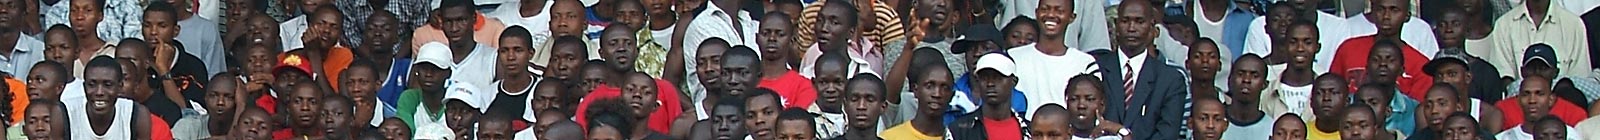 Crowd in Conakry stadium at the RFI Prix des decouverts, Guinea December 2007.